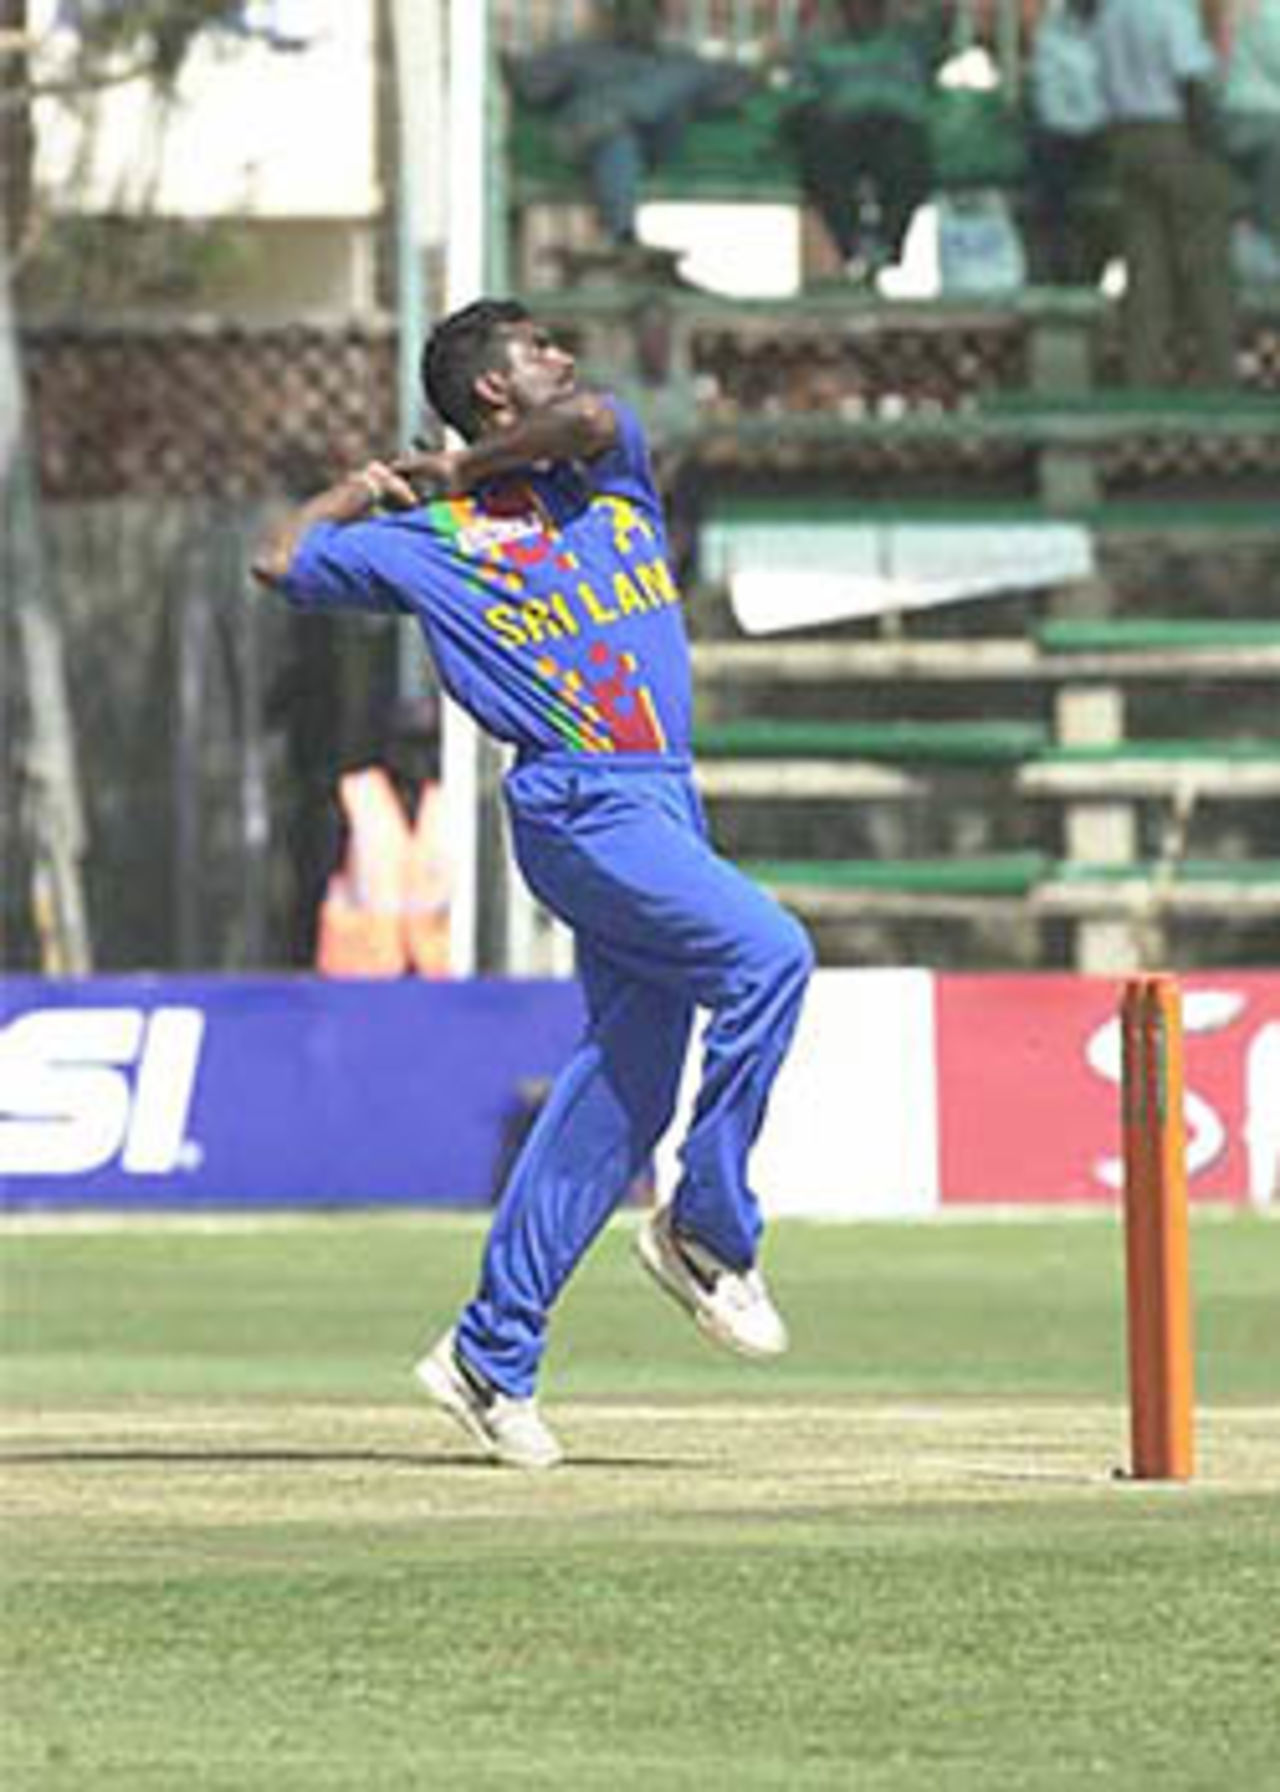 Muralitharan just about to deliver the ball, ICC KnockOut, 2000/01, 2nd Preliminary Quarter Final, Sri Lanka v West Indies, Gymkhana Club Ground, Nairobi, 04 October 2000.